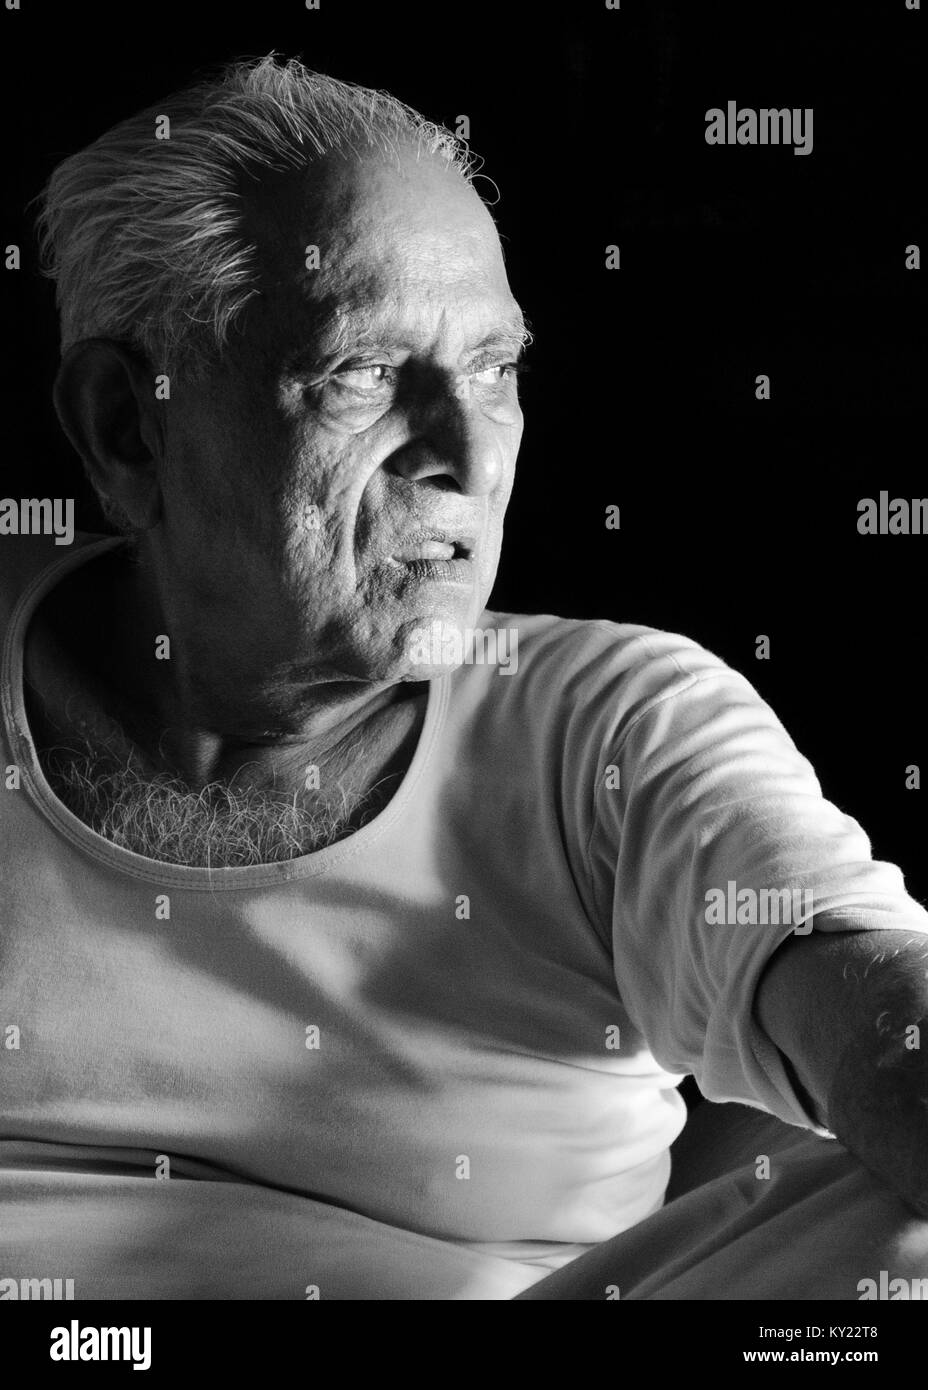 Black and white portrait of an elderly Indian man looking away, lost in thought, over black background. Stock Photo